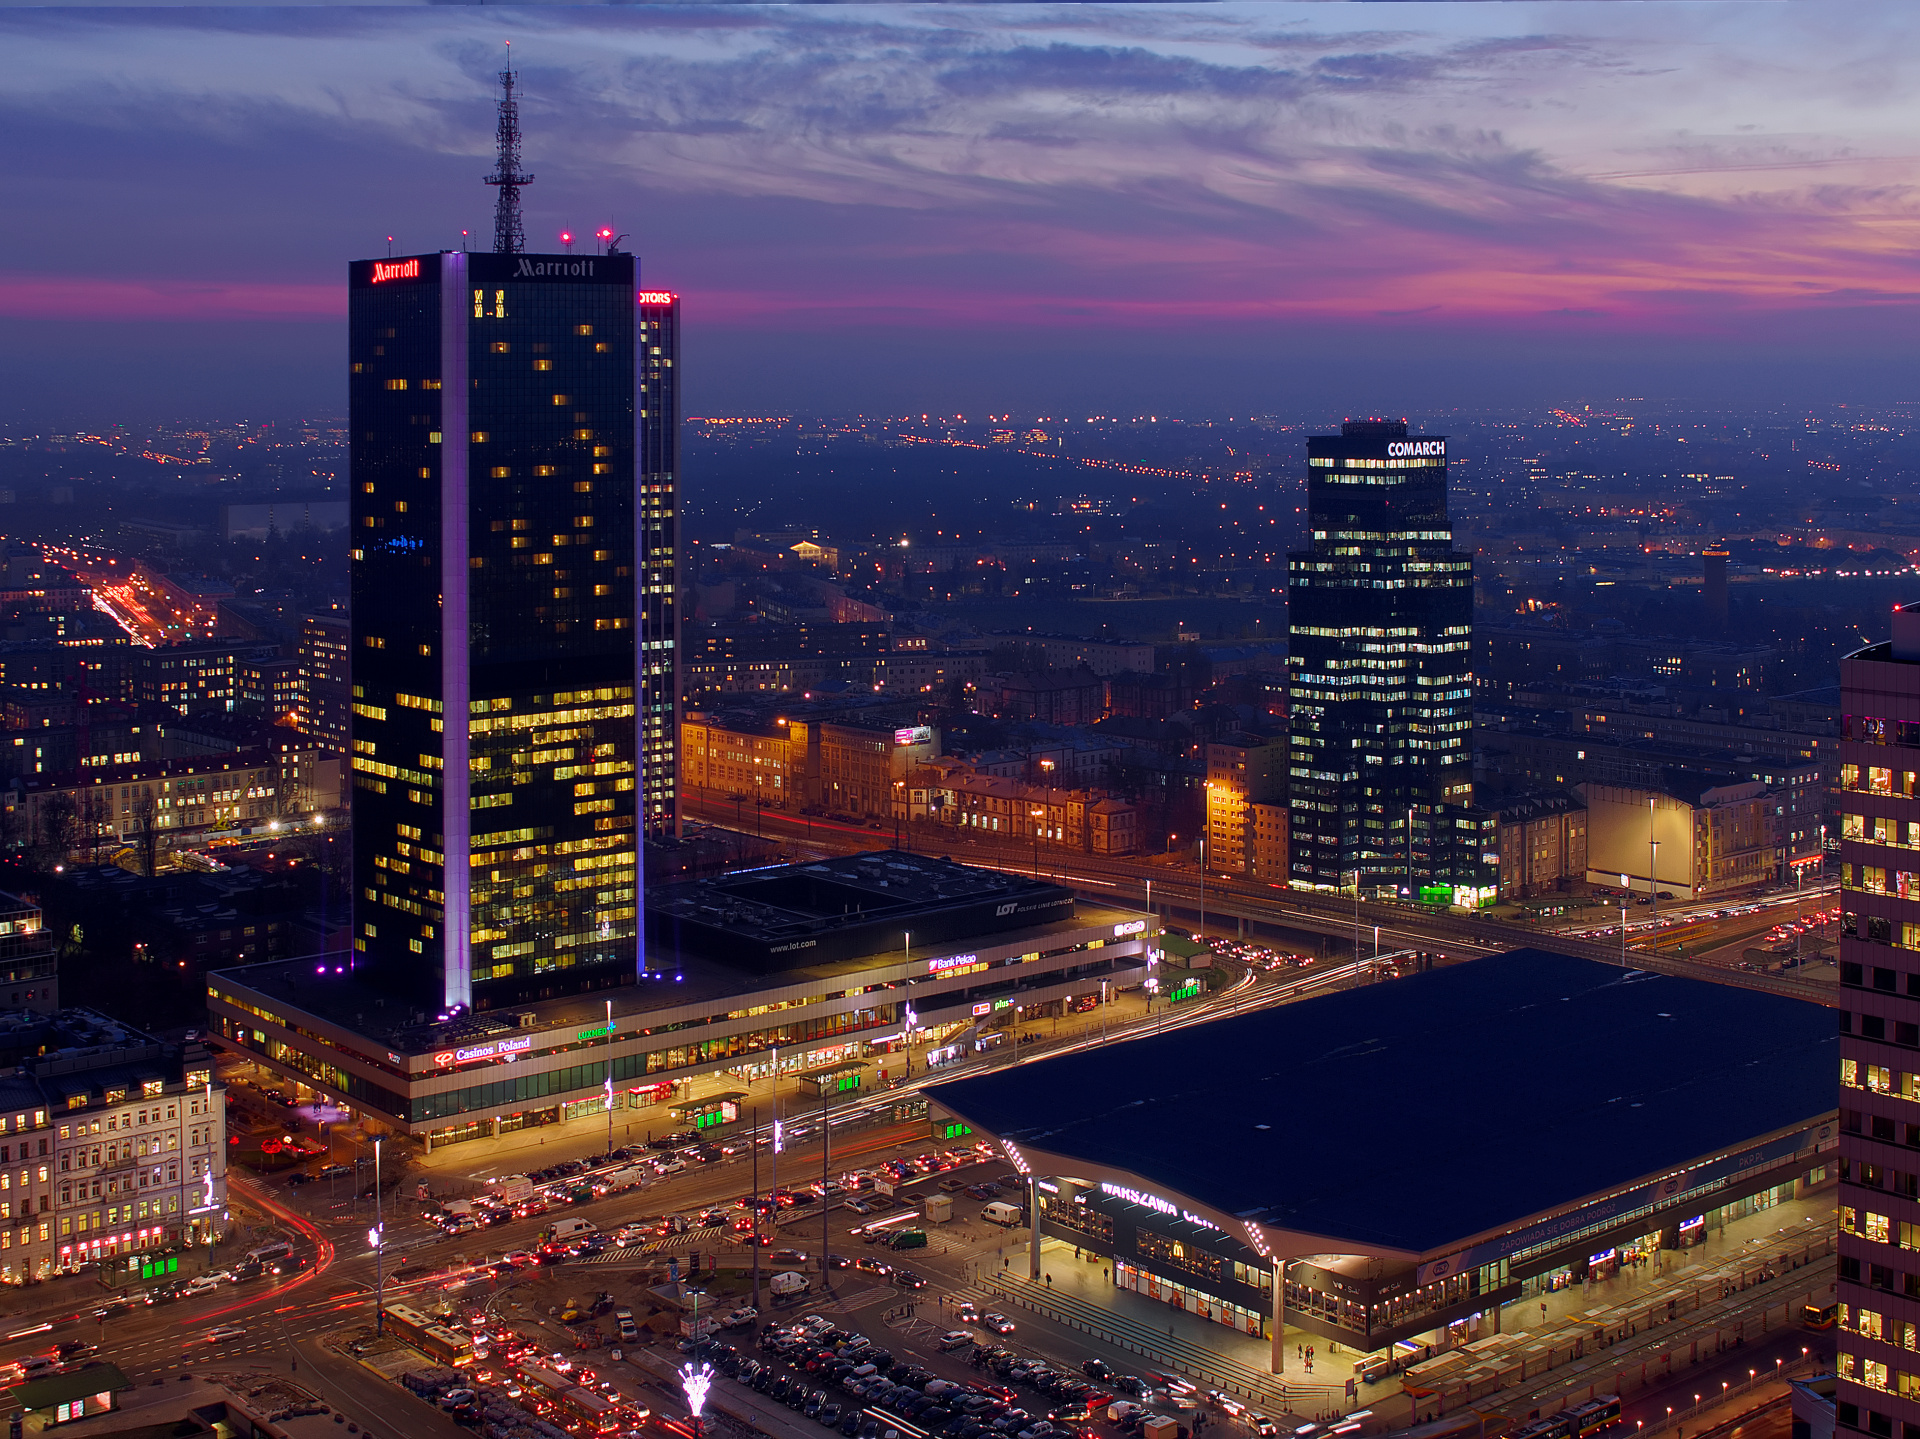 Marriot Hotel, ORCO Tower and Central Railway Station (Warsaw » Warsaw from Above)